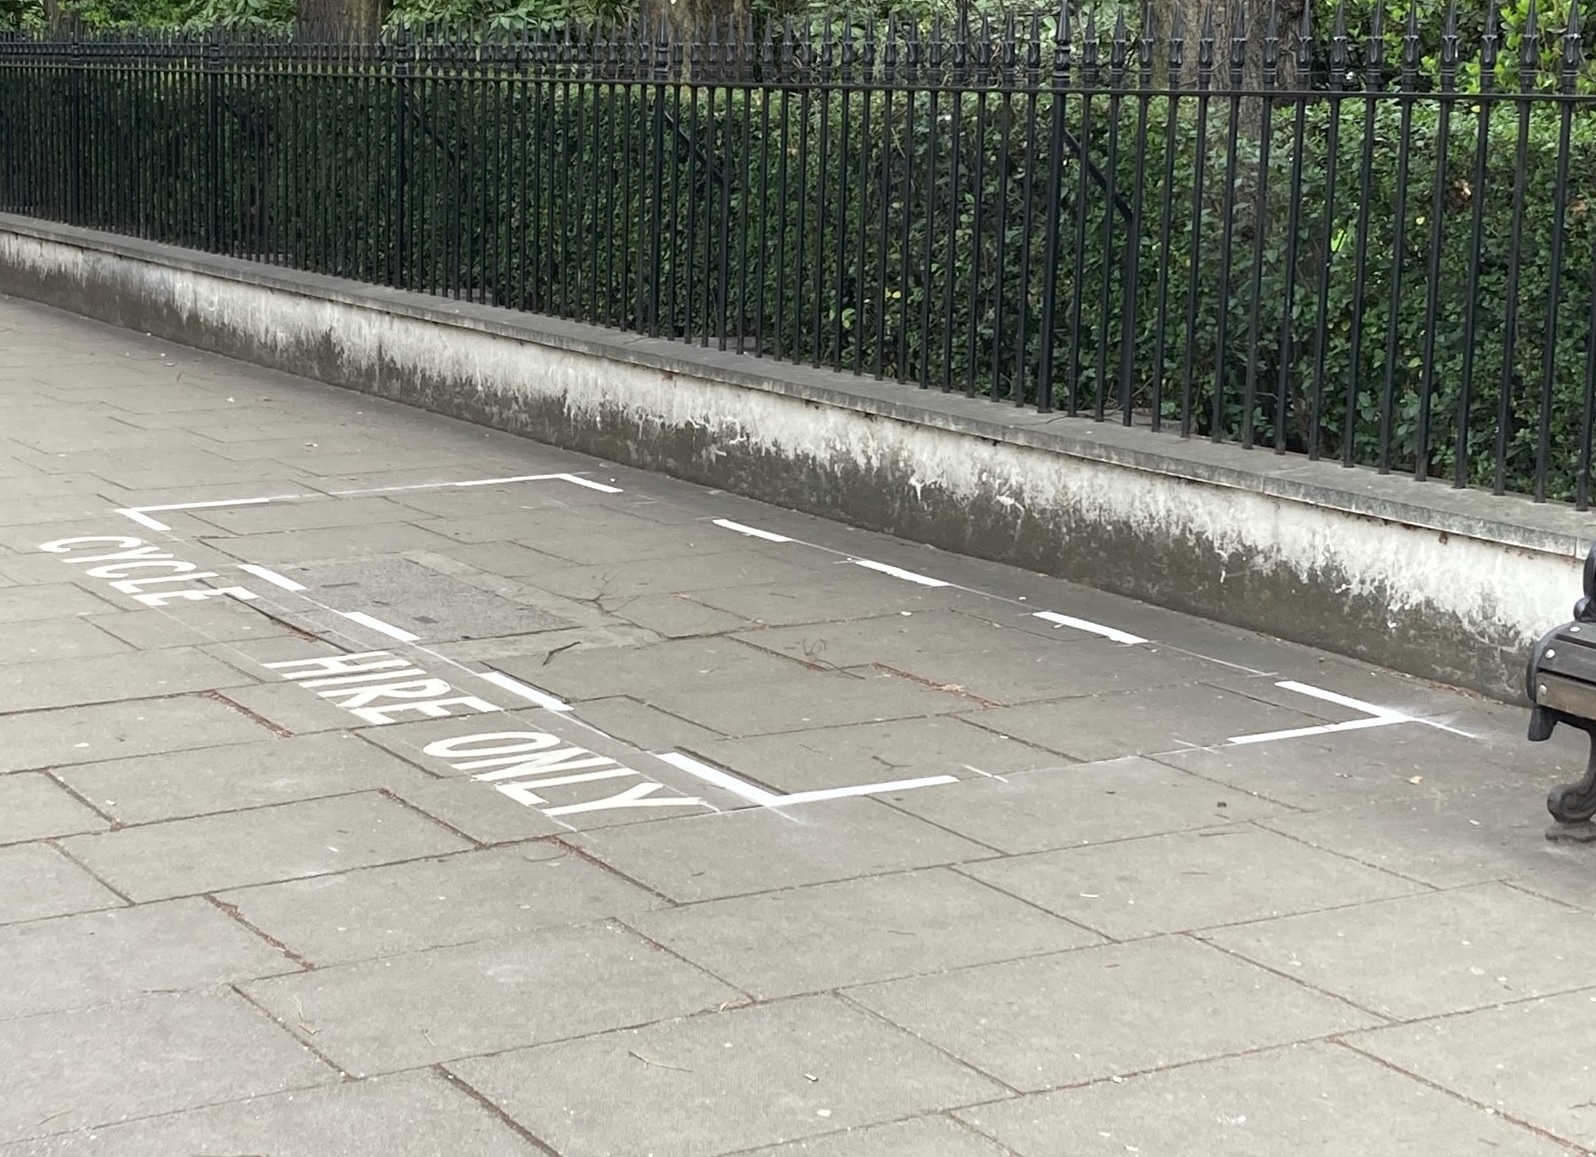 Example of a marked rental e-bike parking bay on the footway